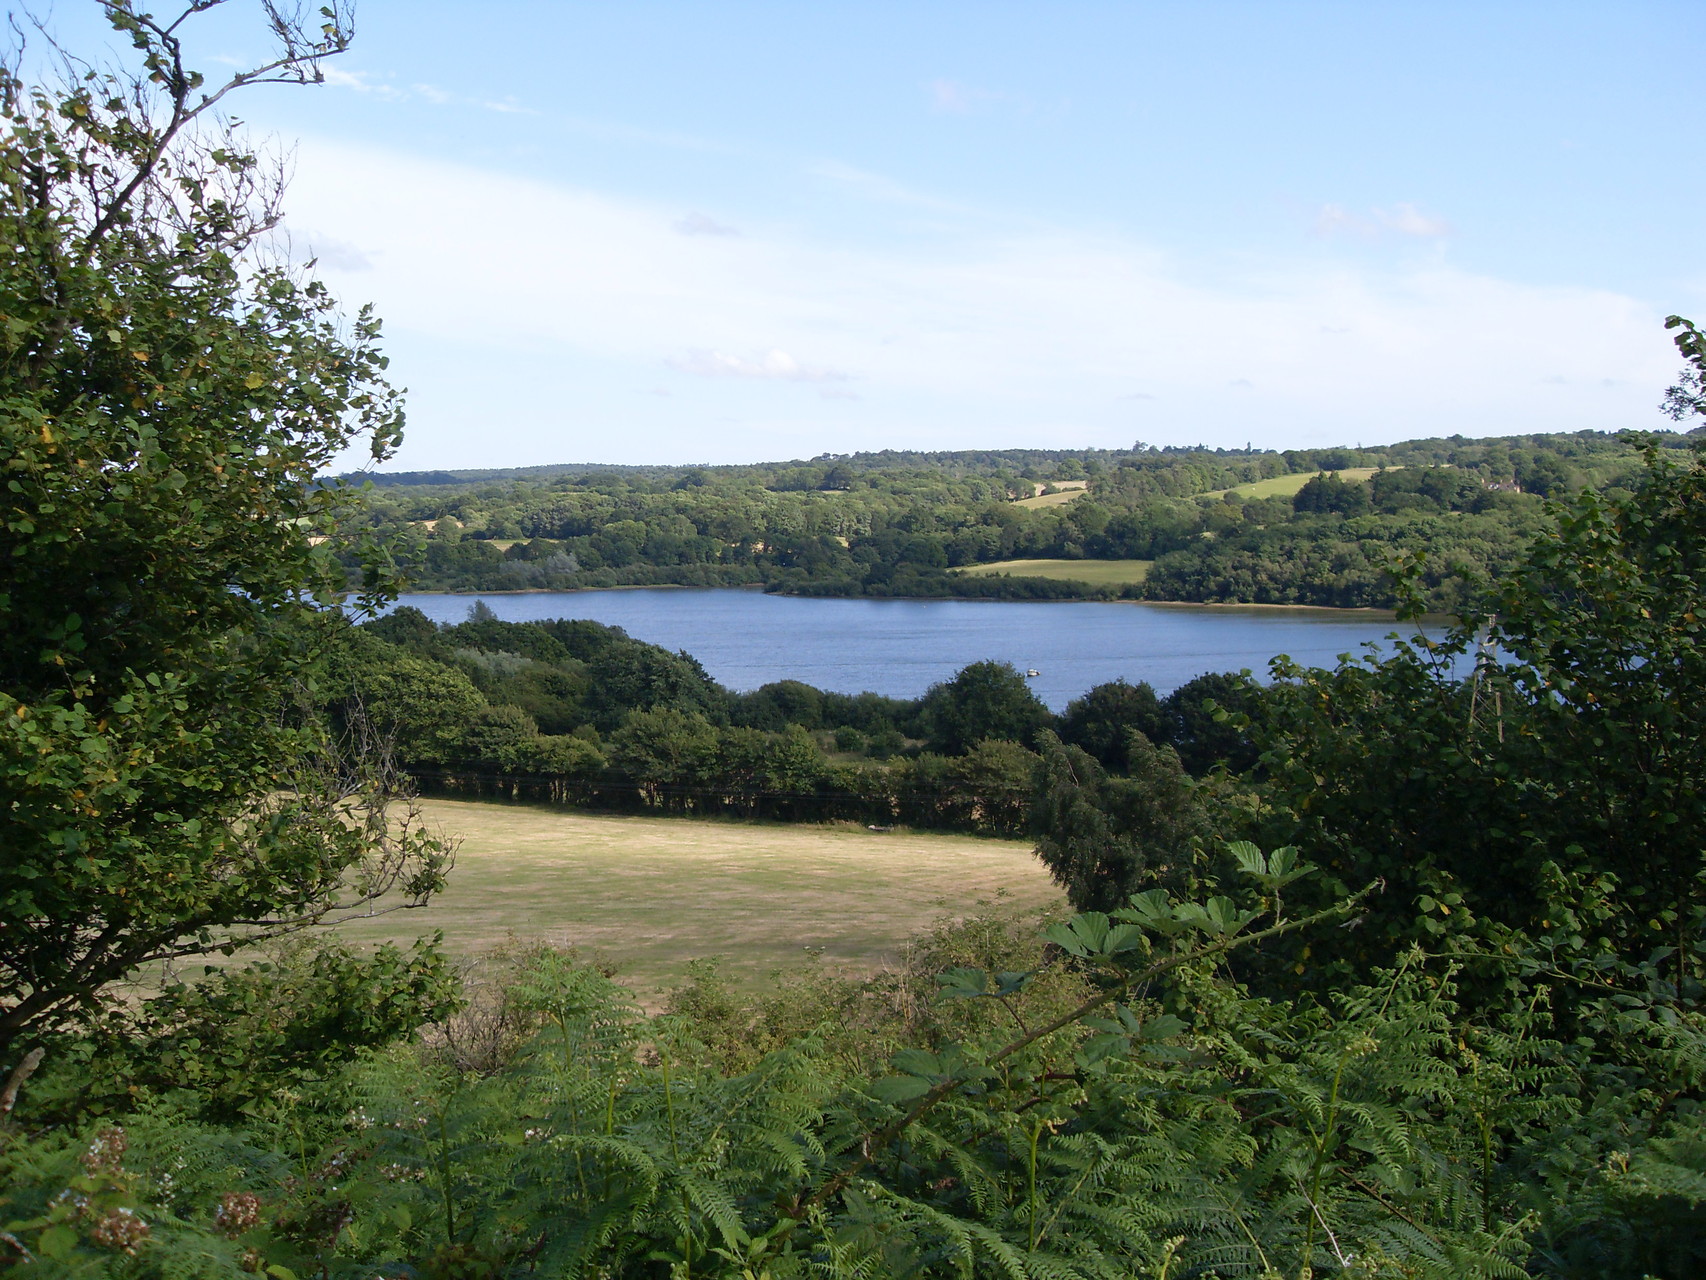 A view of Weir Wood reservoir in East Grinstead